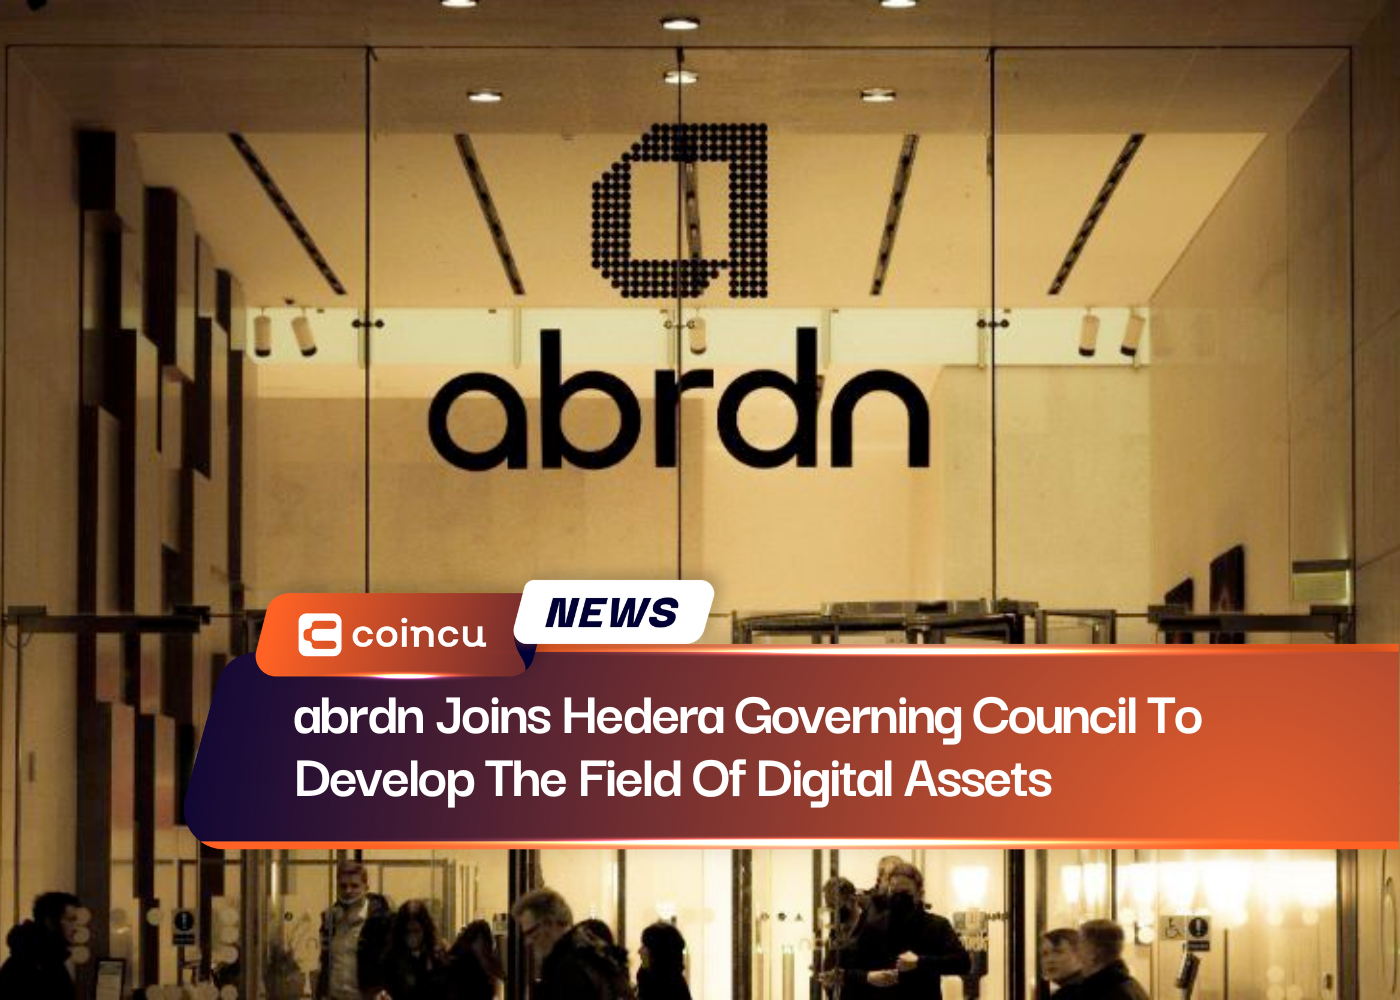 abrdn Joins Hedera Governing Council To Develop The Field Of Digital Assets